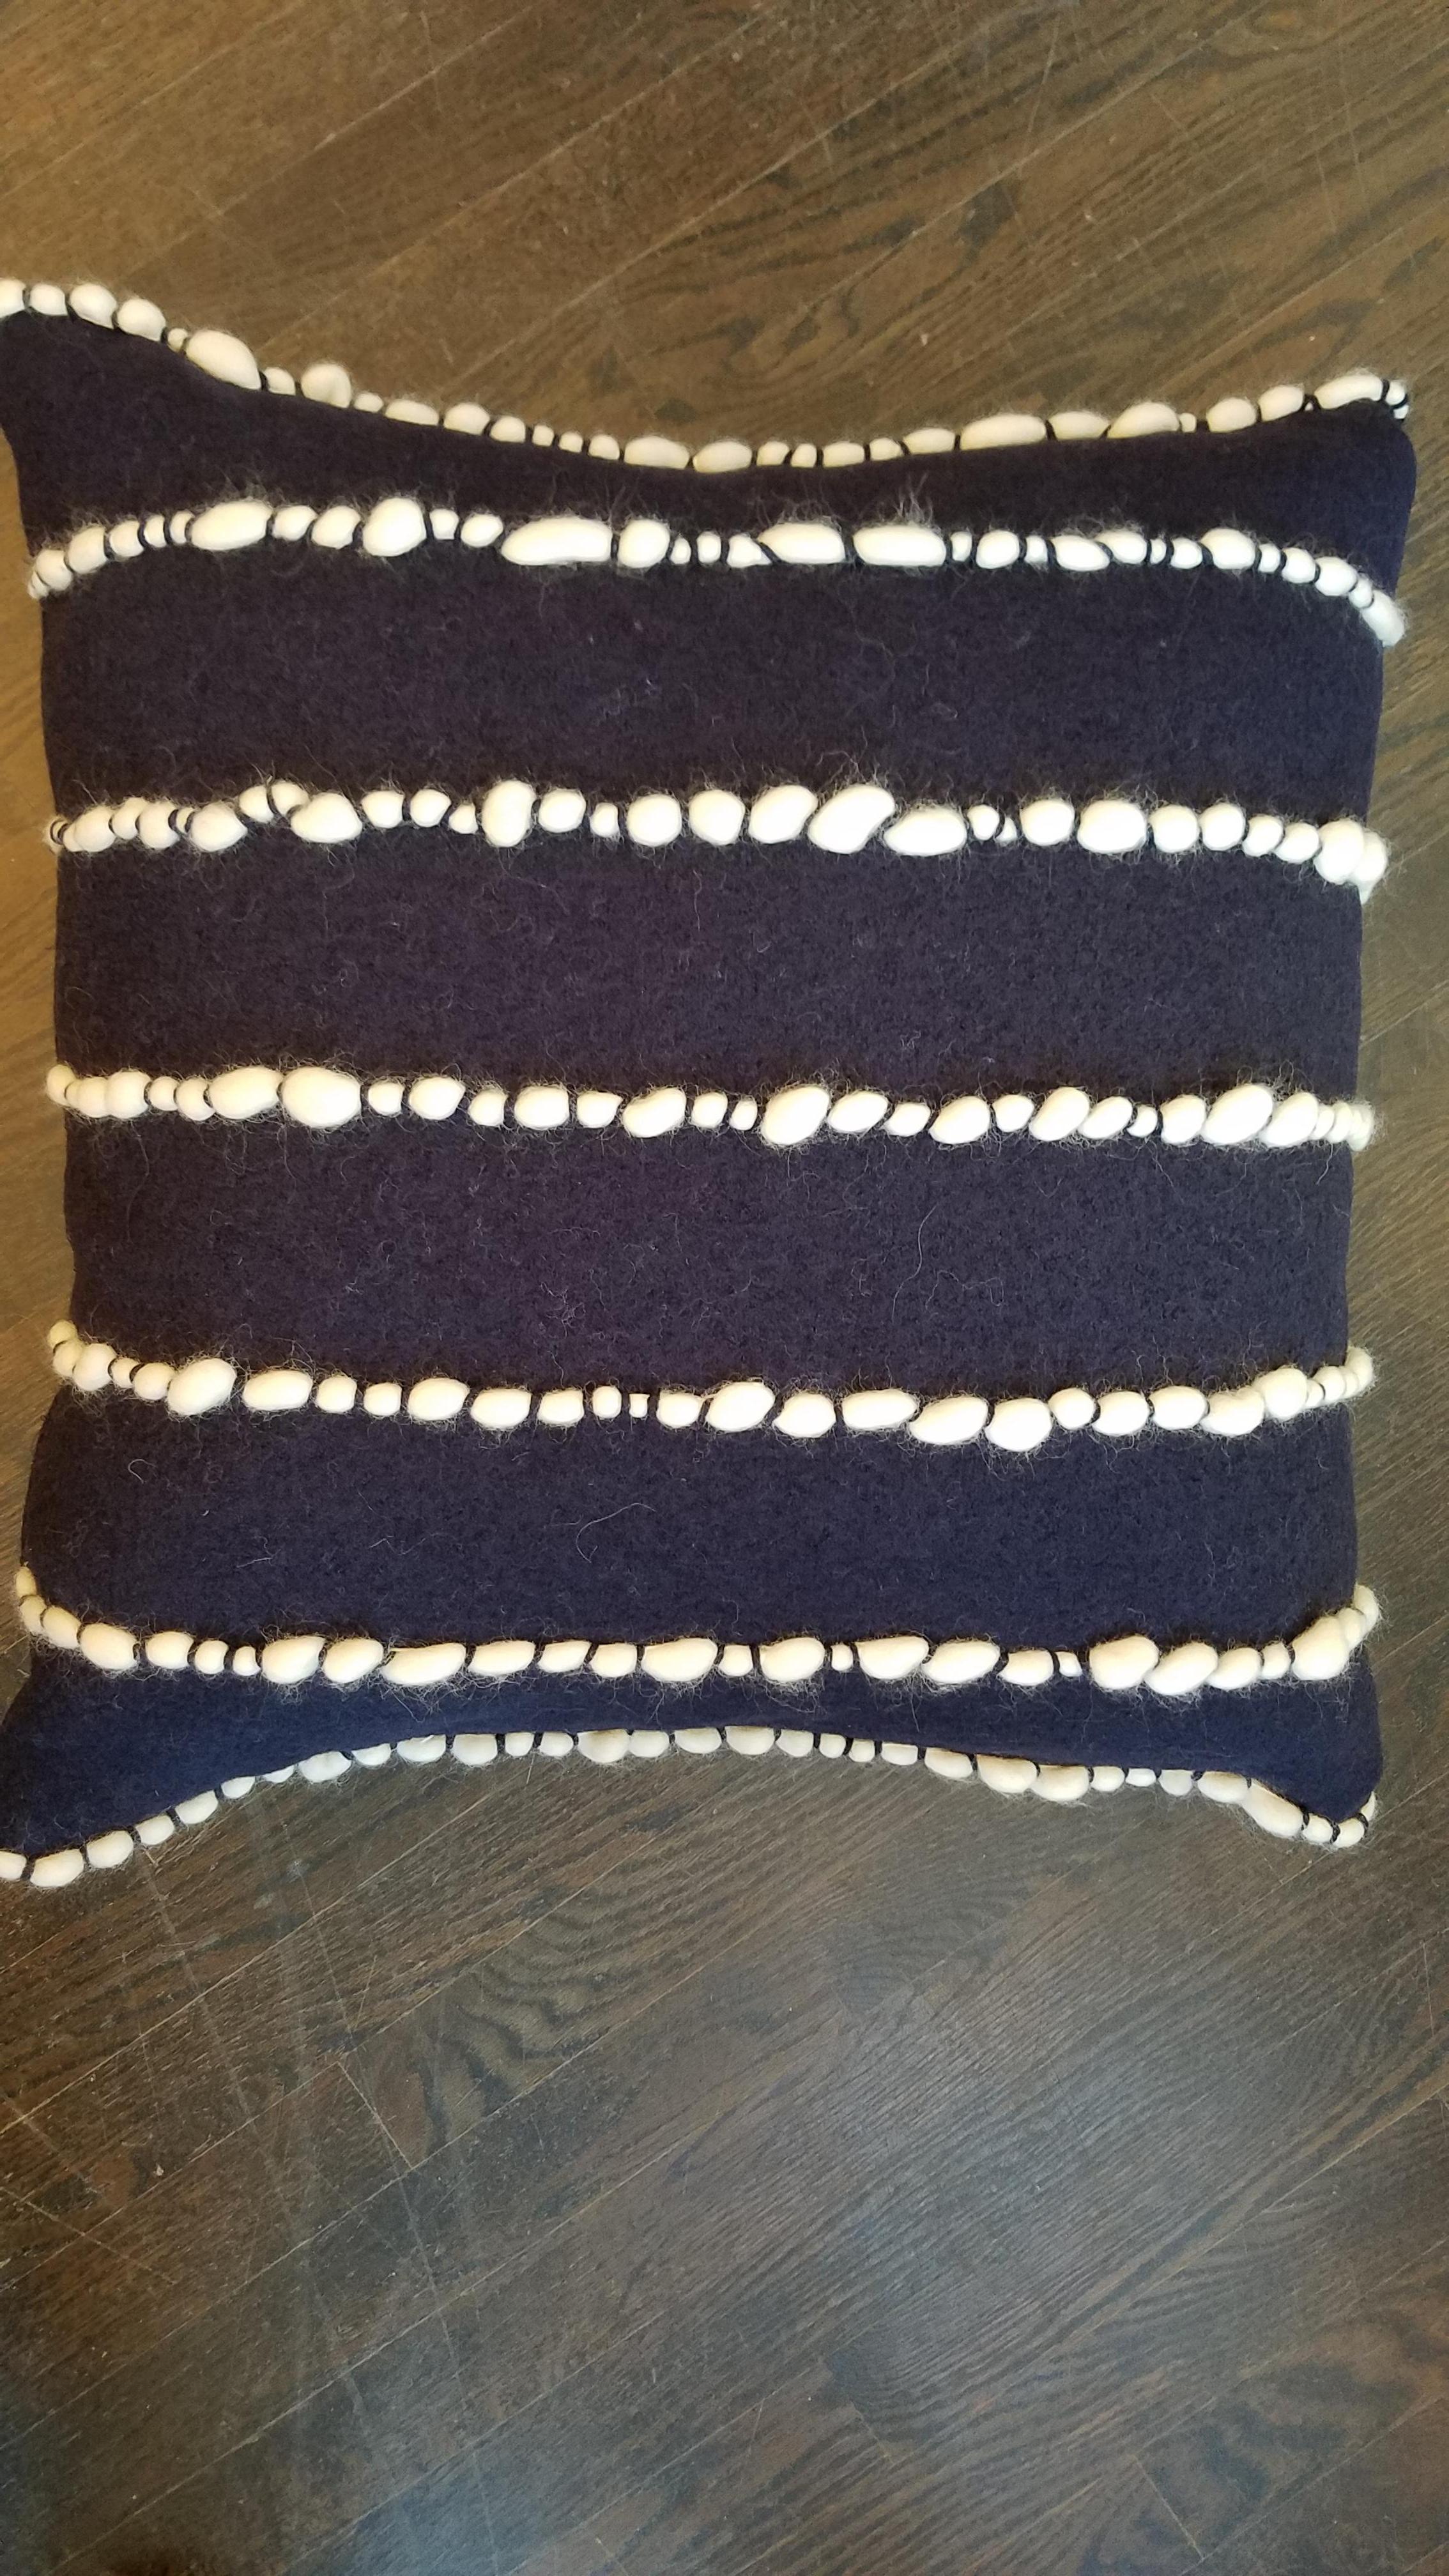 100% merino wool handwoven, hand-channeled and tufted, navy blue pillow with feather/down insert and concealed zipper. Made in Italy.